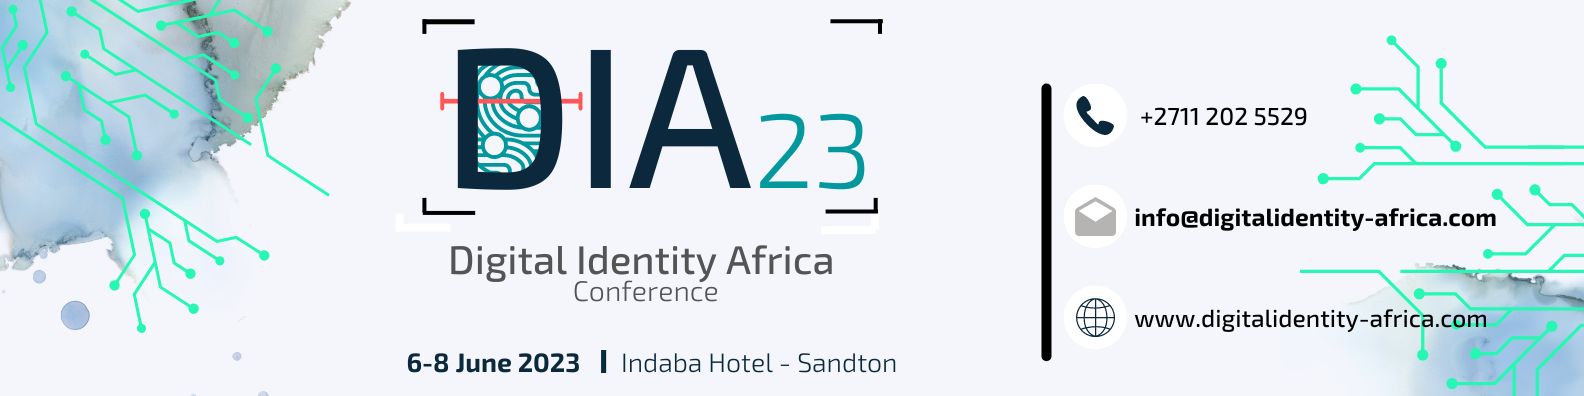 Digital Identity Africa Conference 2023